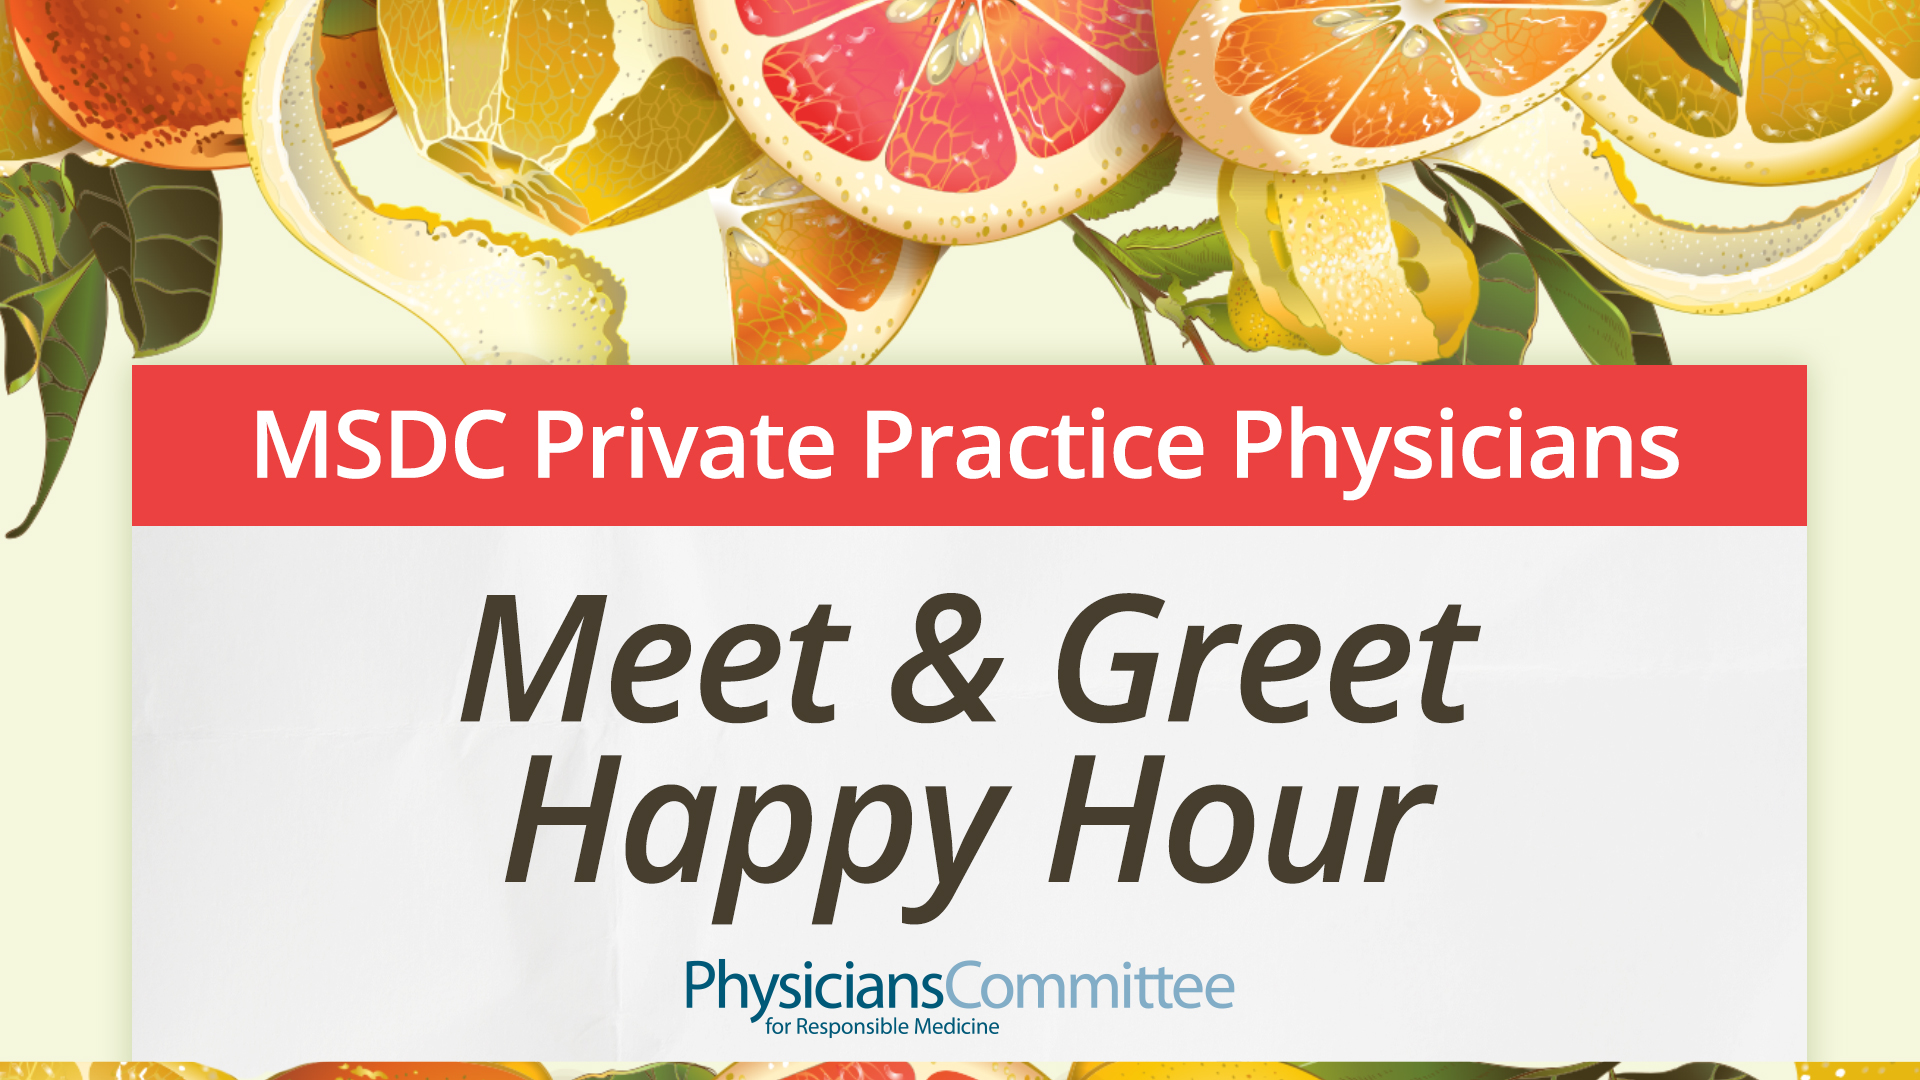 MSDC Meet and Greet Happy Hour